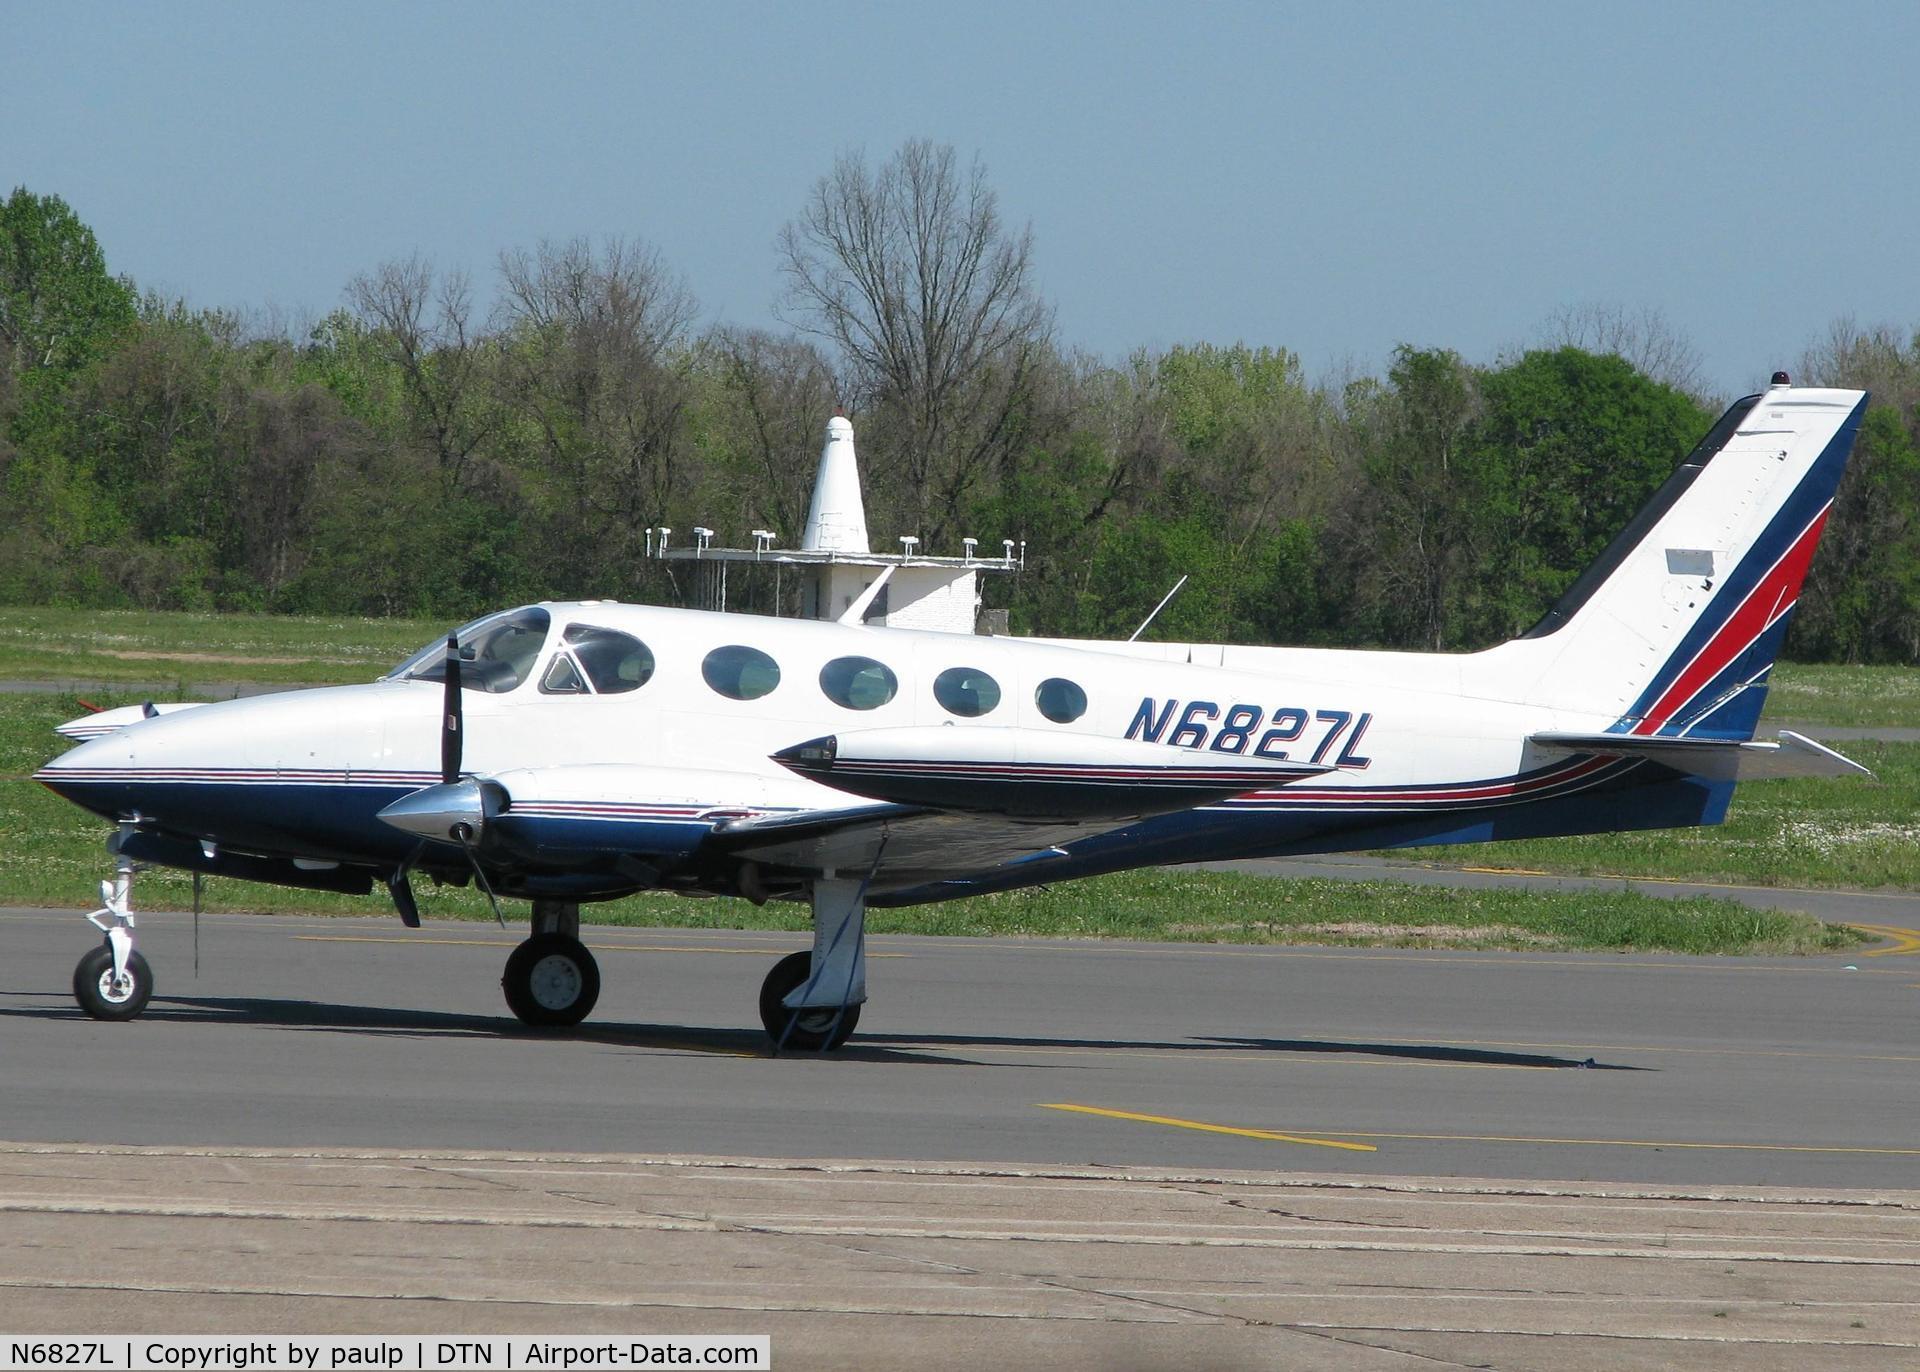 N6827L, Cessna 340A C/N 340A1219, Parked at the Shreveport Downtown airport.